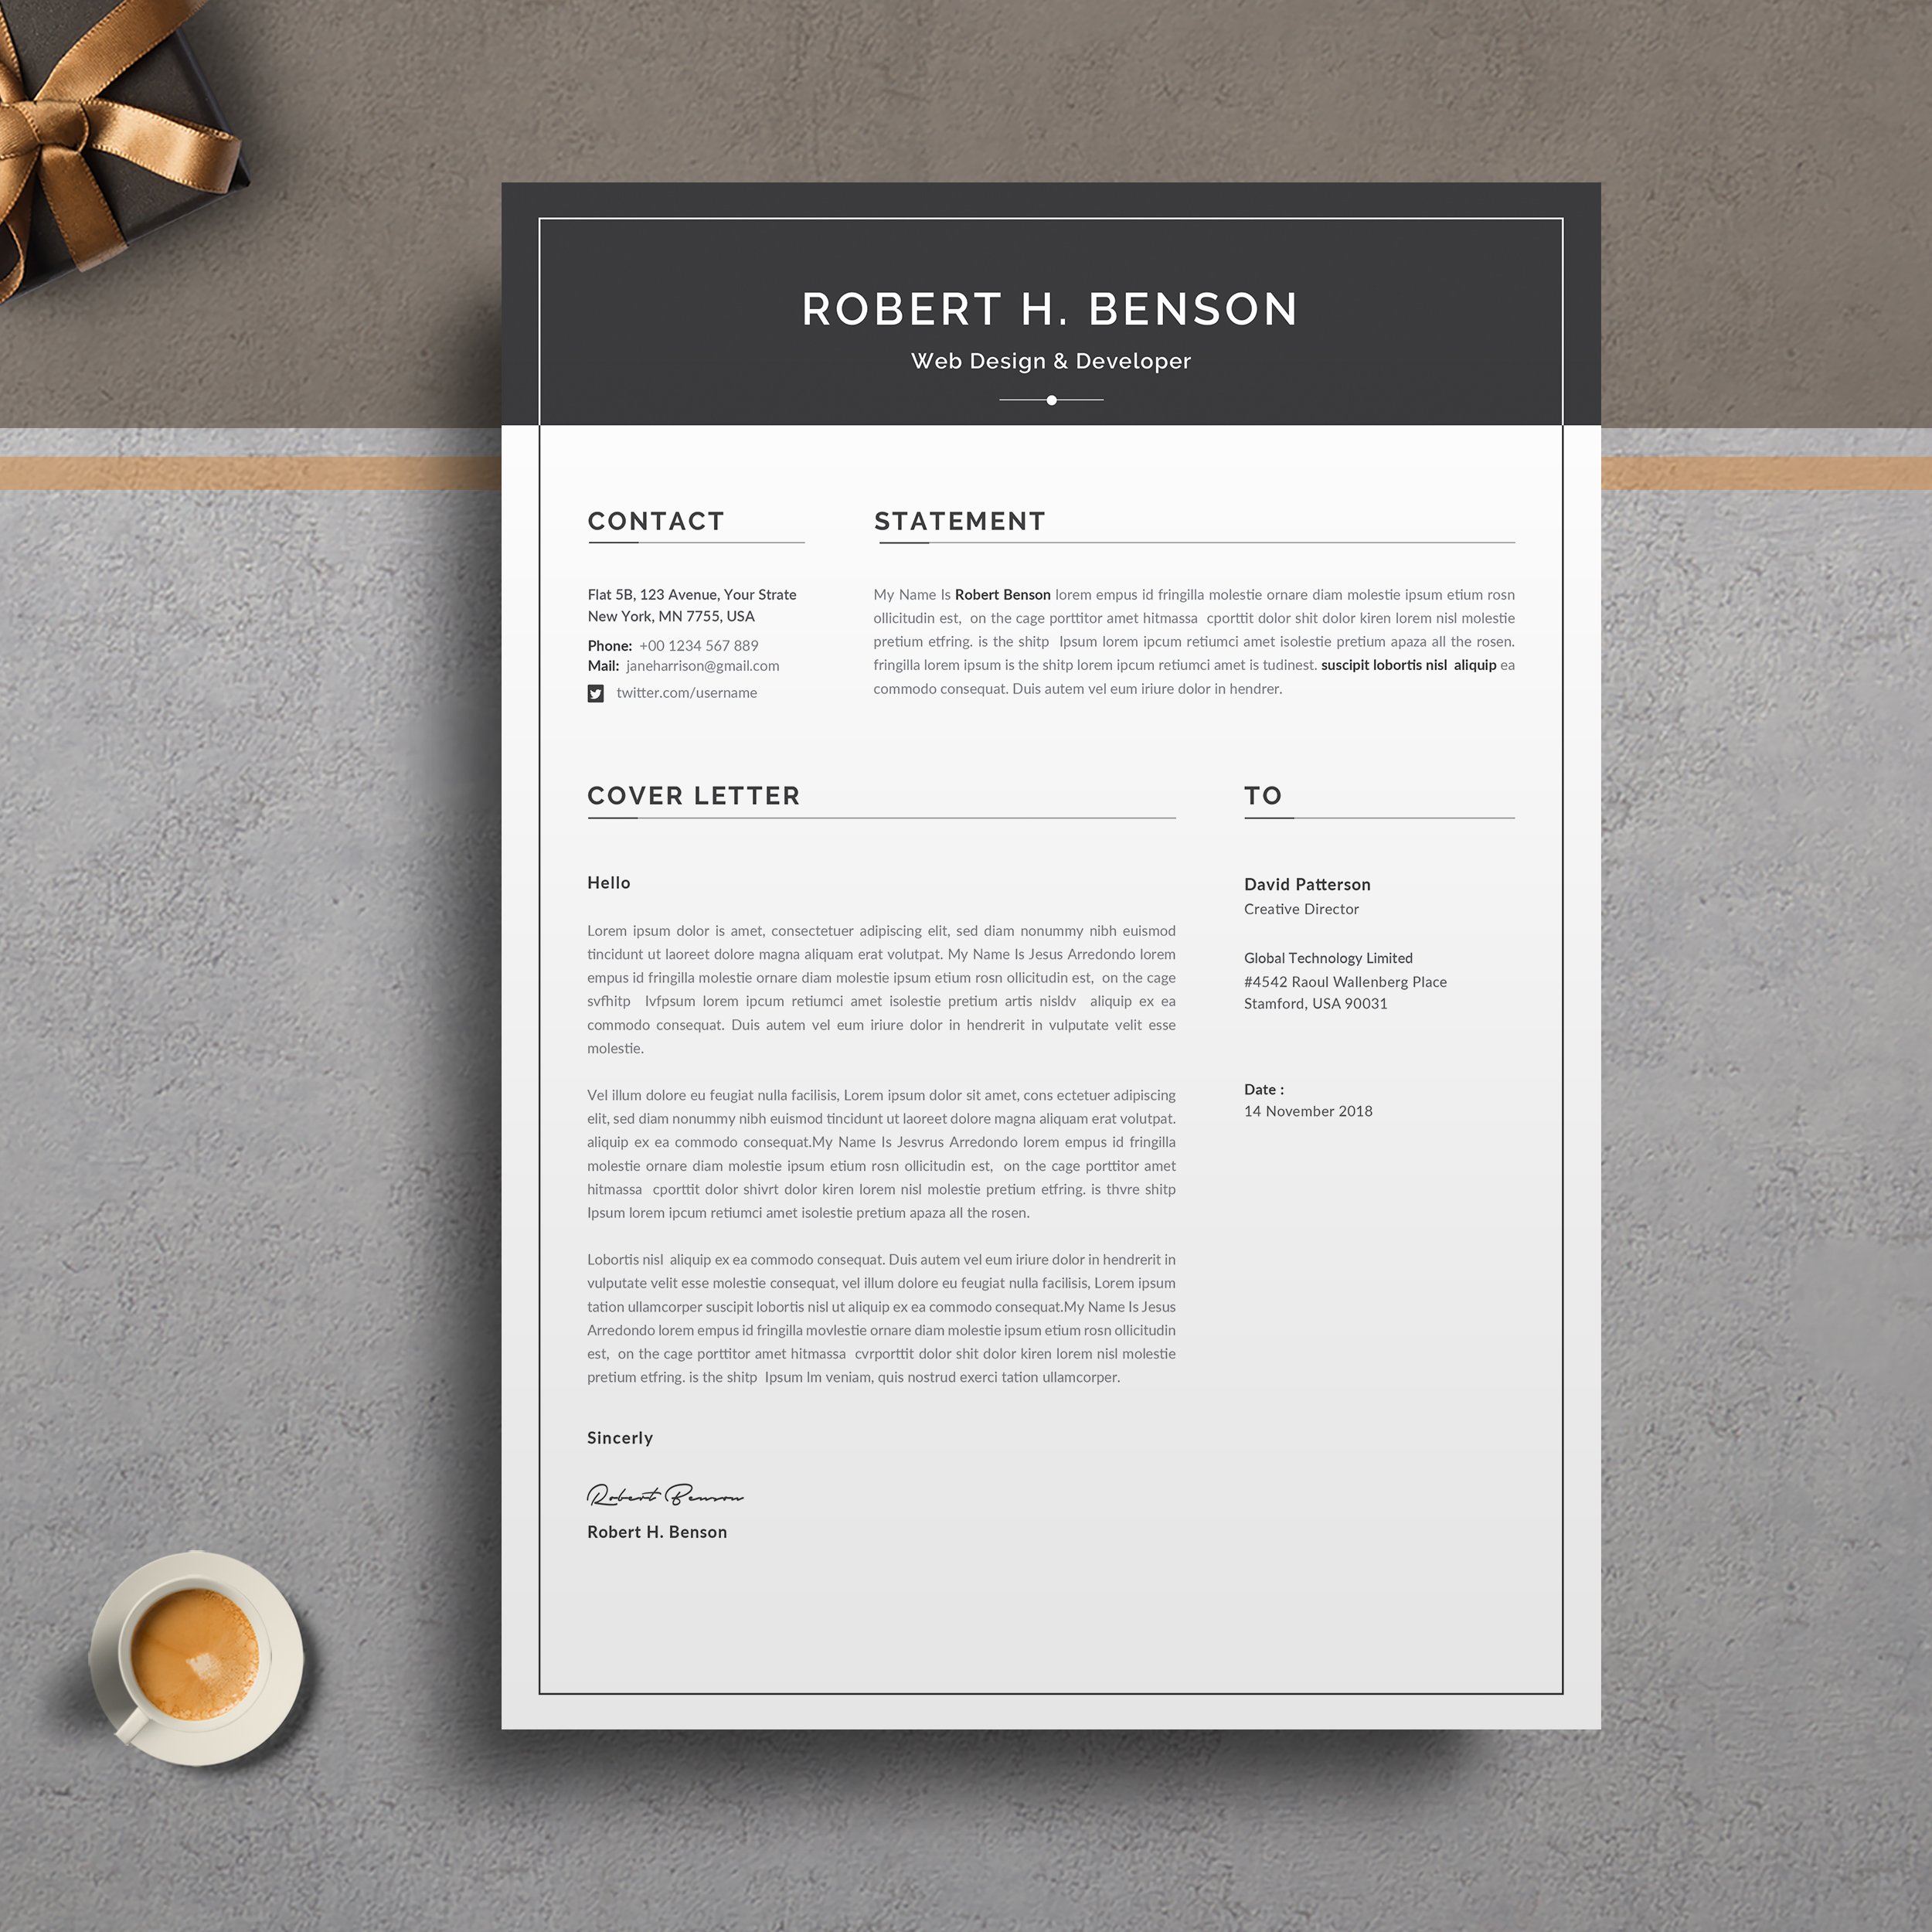 Word Resume/CV preview image.